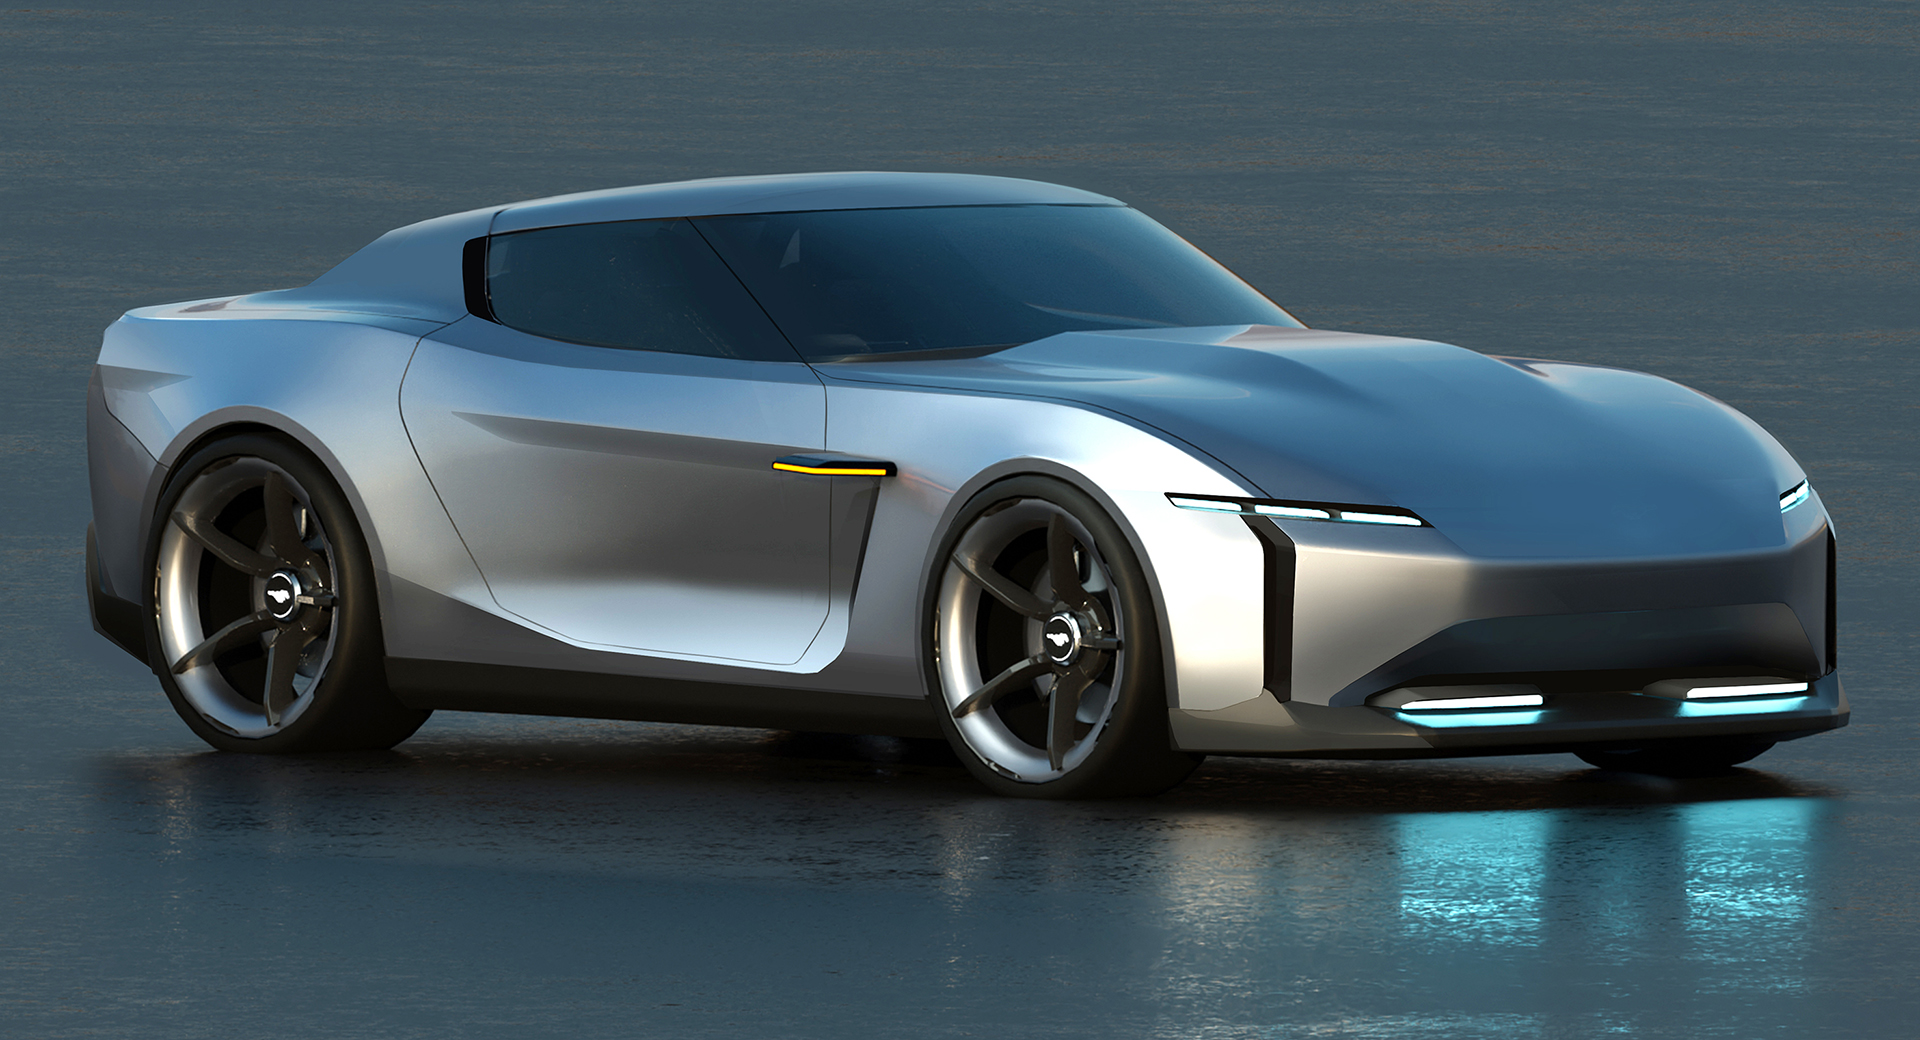 Designer’s Ford Mustang E1 Study Imagines A Smaller Electric Pony Car ...